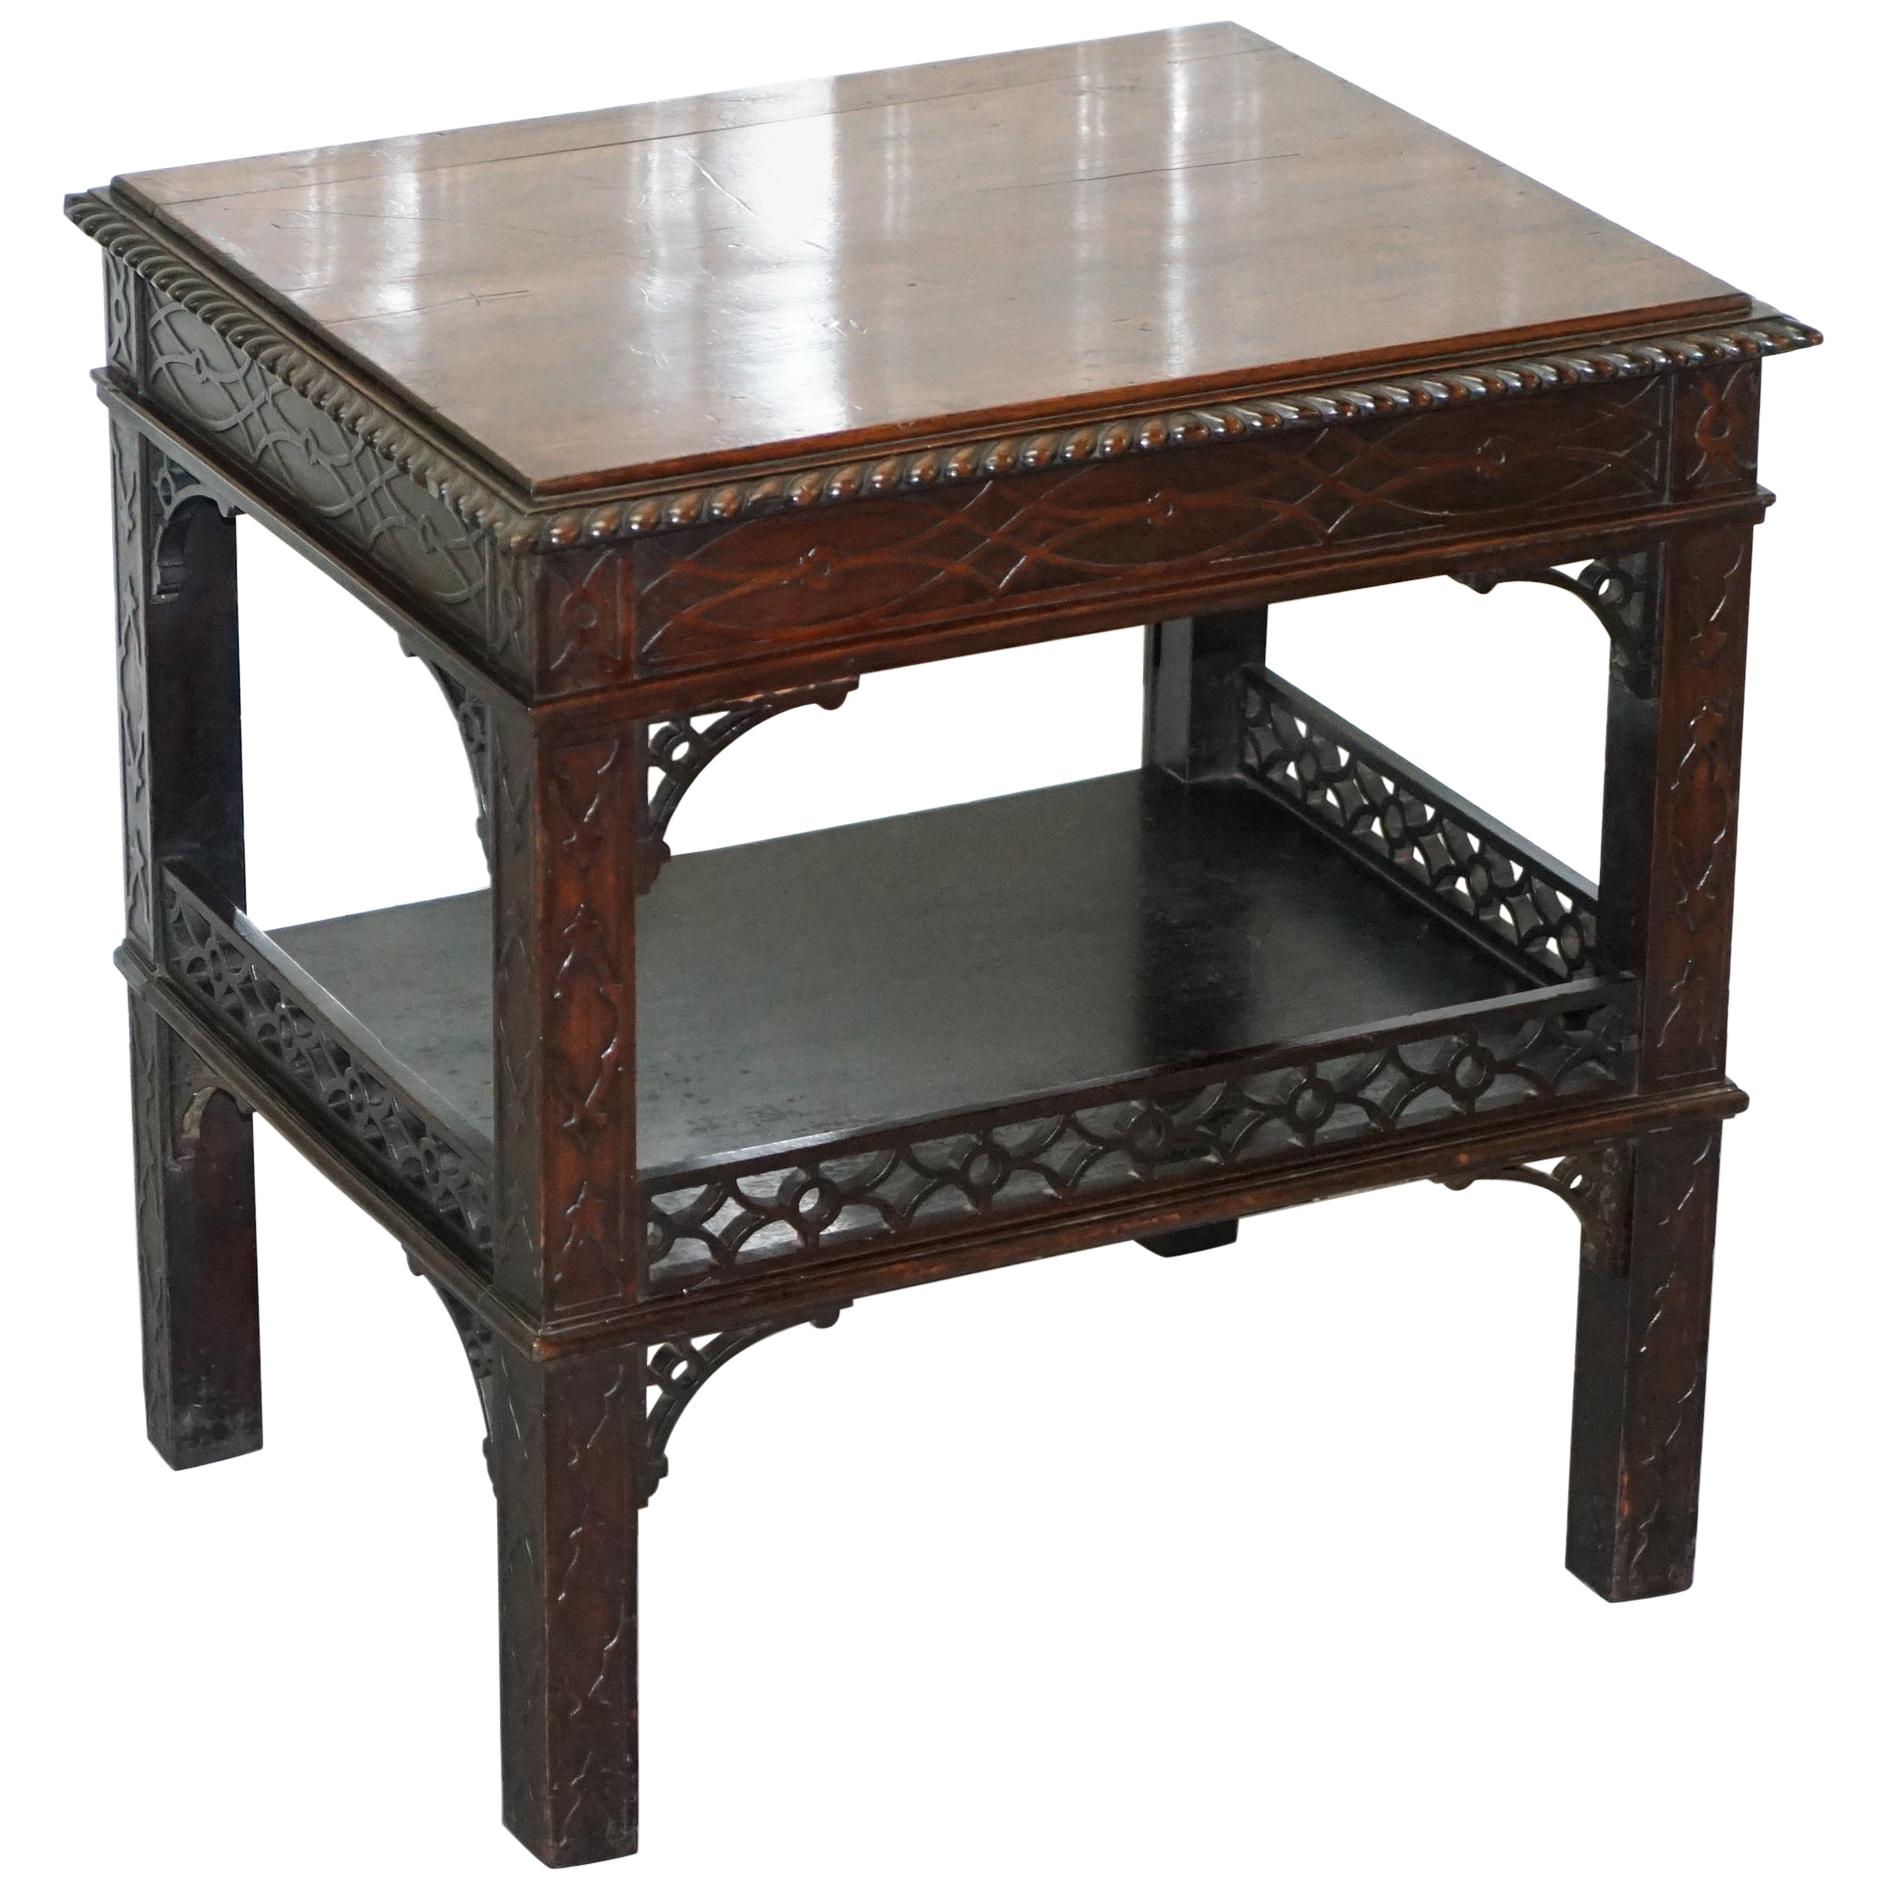 19th Century Thomas Chippendale Fret Work Carved and Pierced Occasional Table For Sale